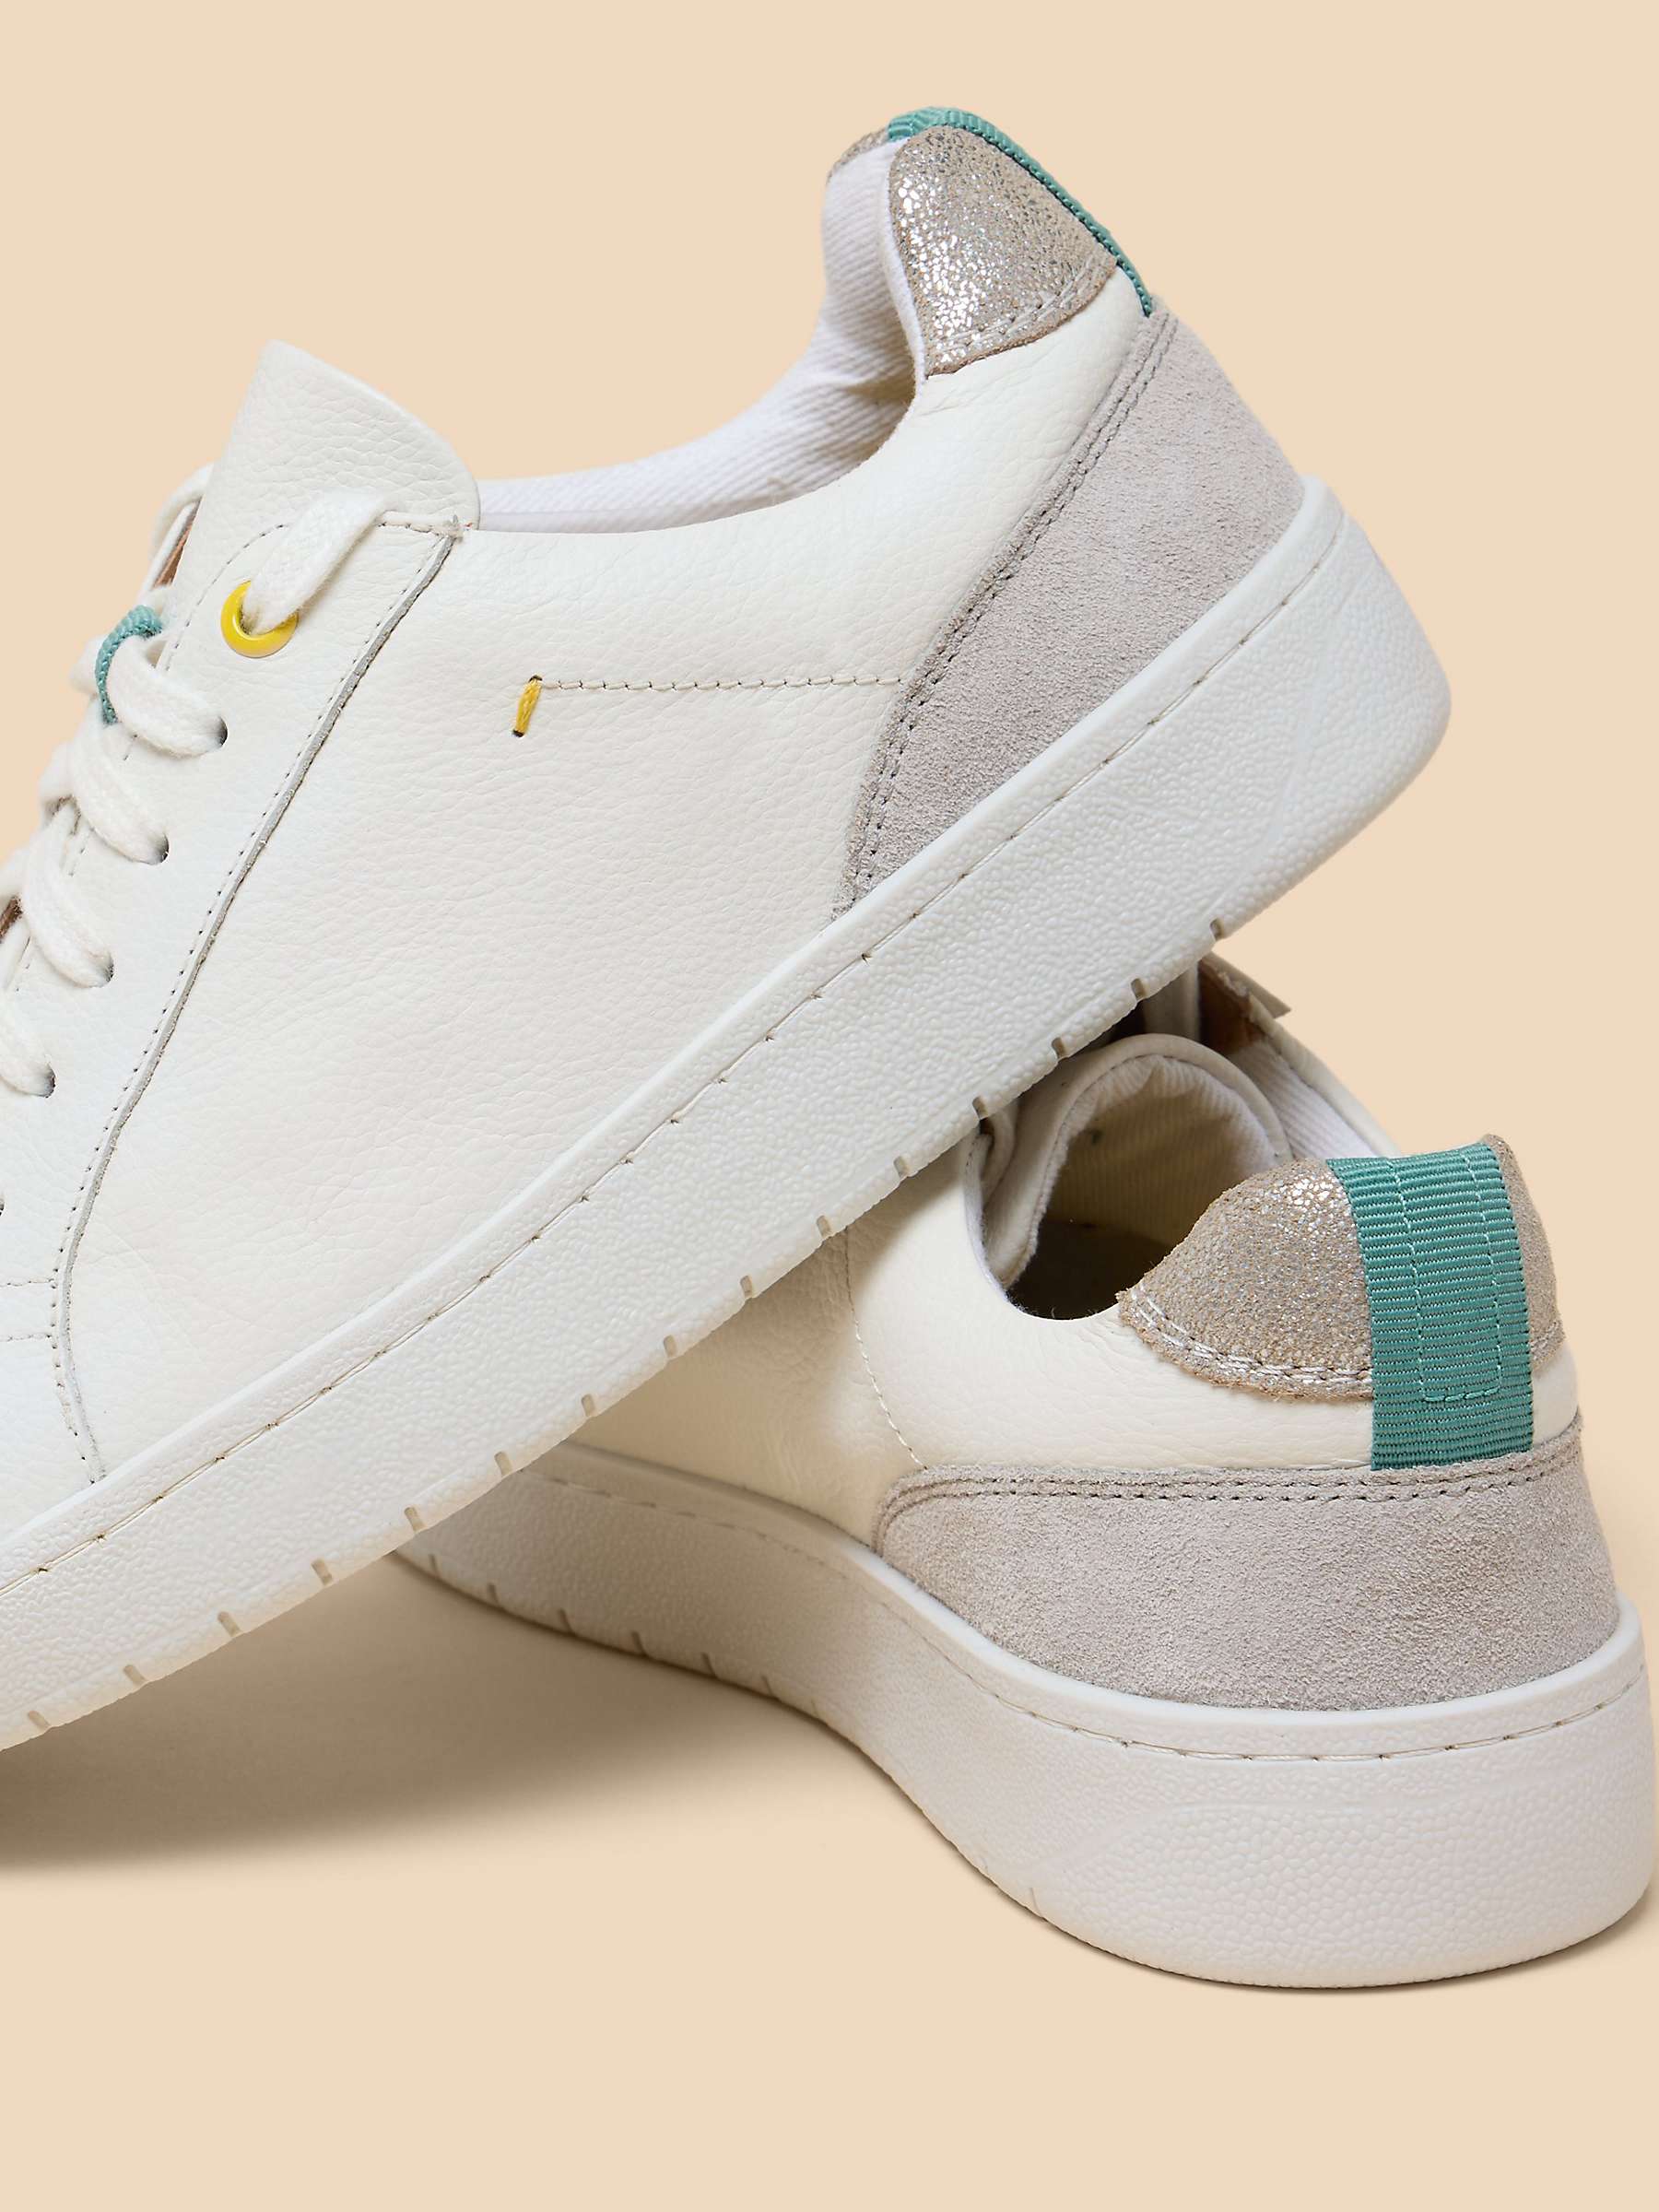 Buy White Stuff Suede Trainers, White/Multi Online at johnlewis.com